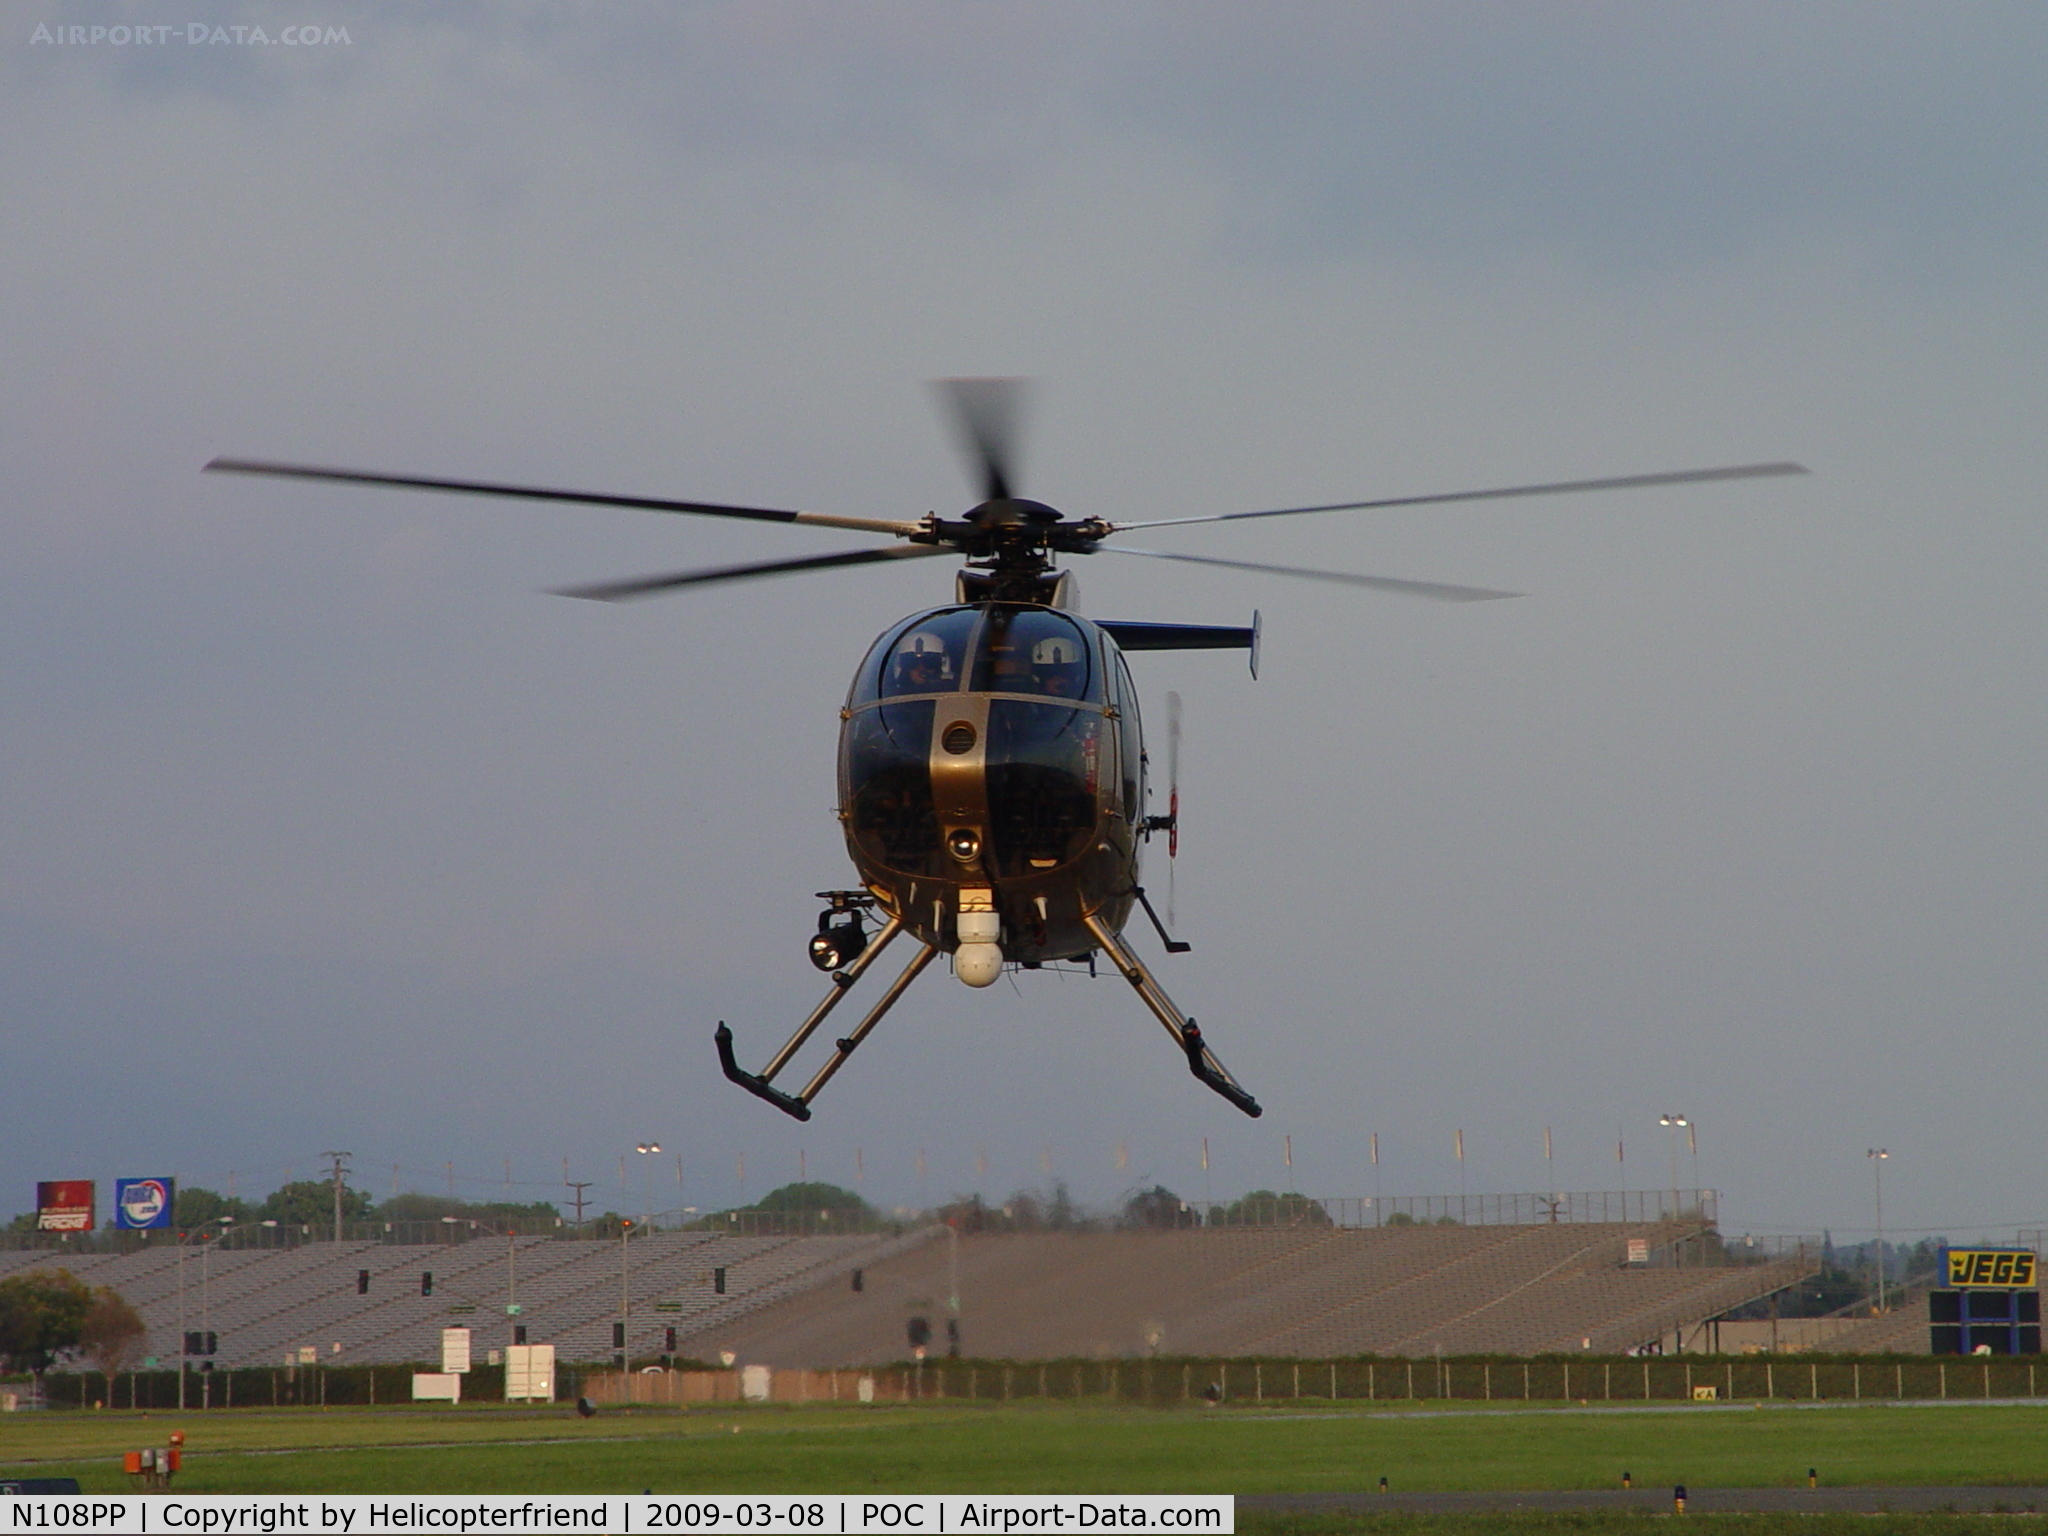 N108PP, 2008 MD Helicopters 369E C/N 0578E, Coming in for a landing prior to going on patrol